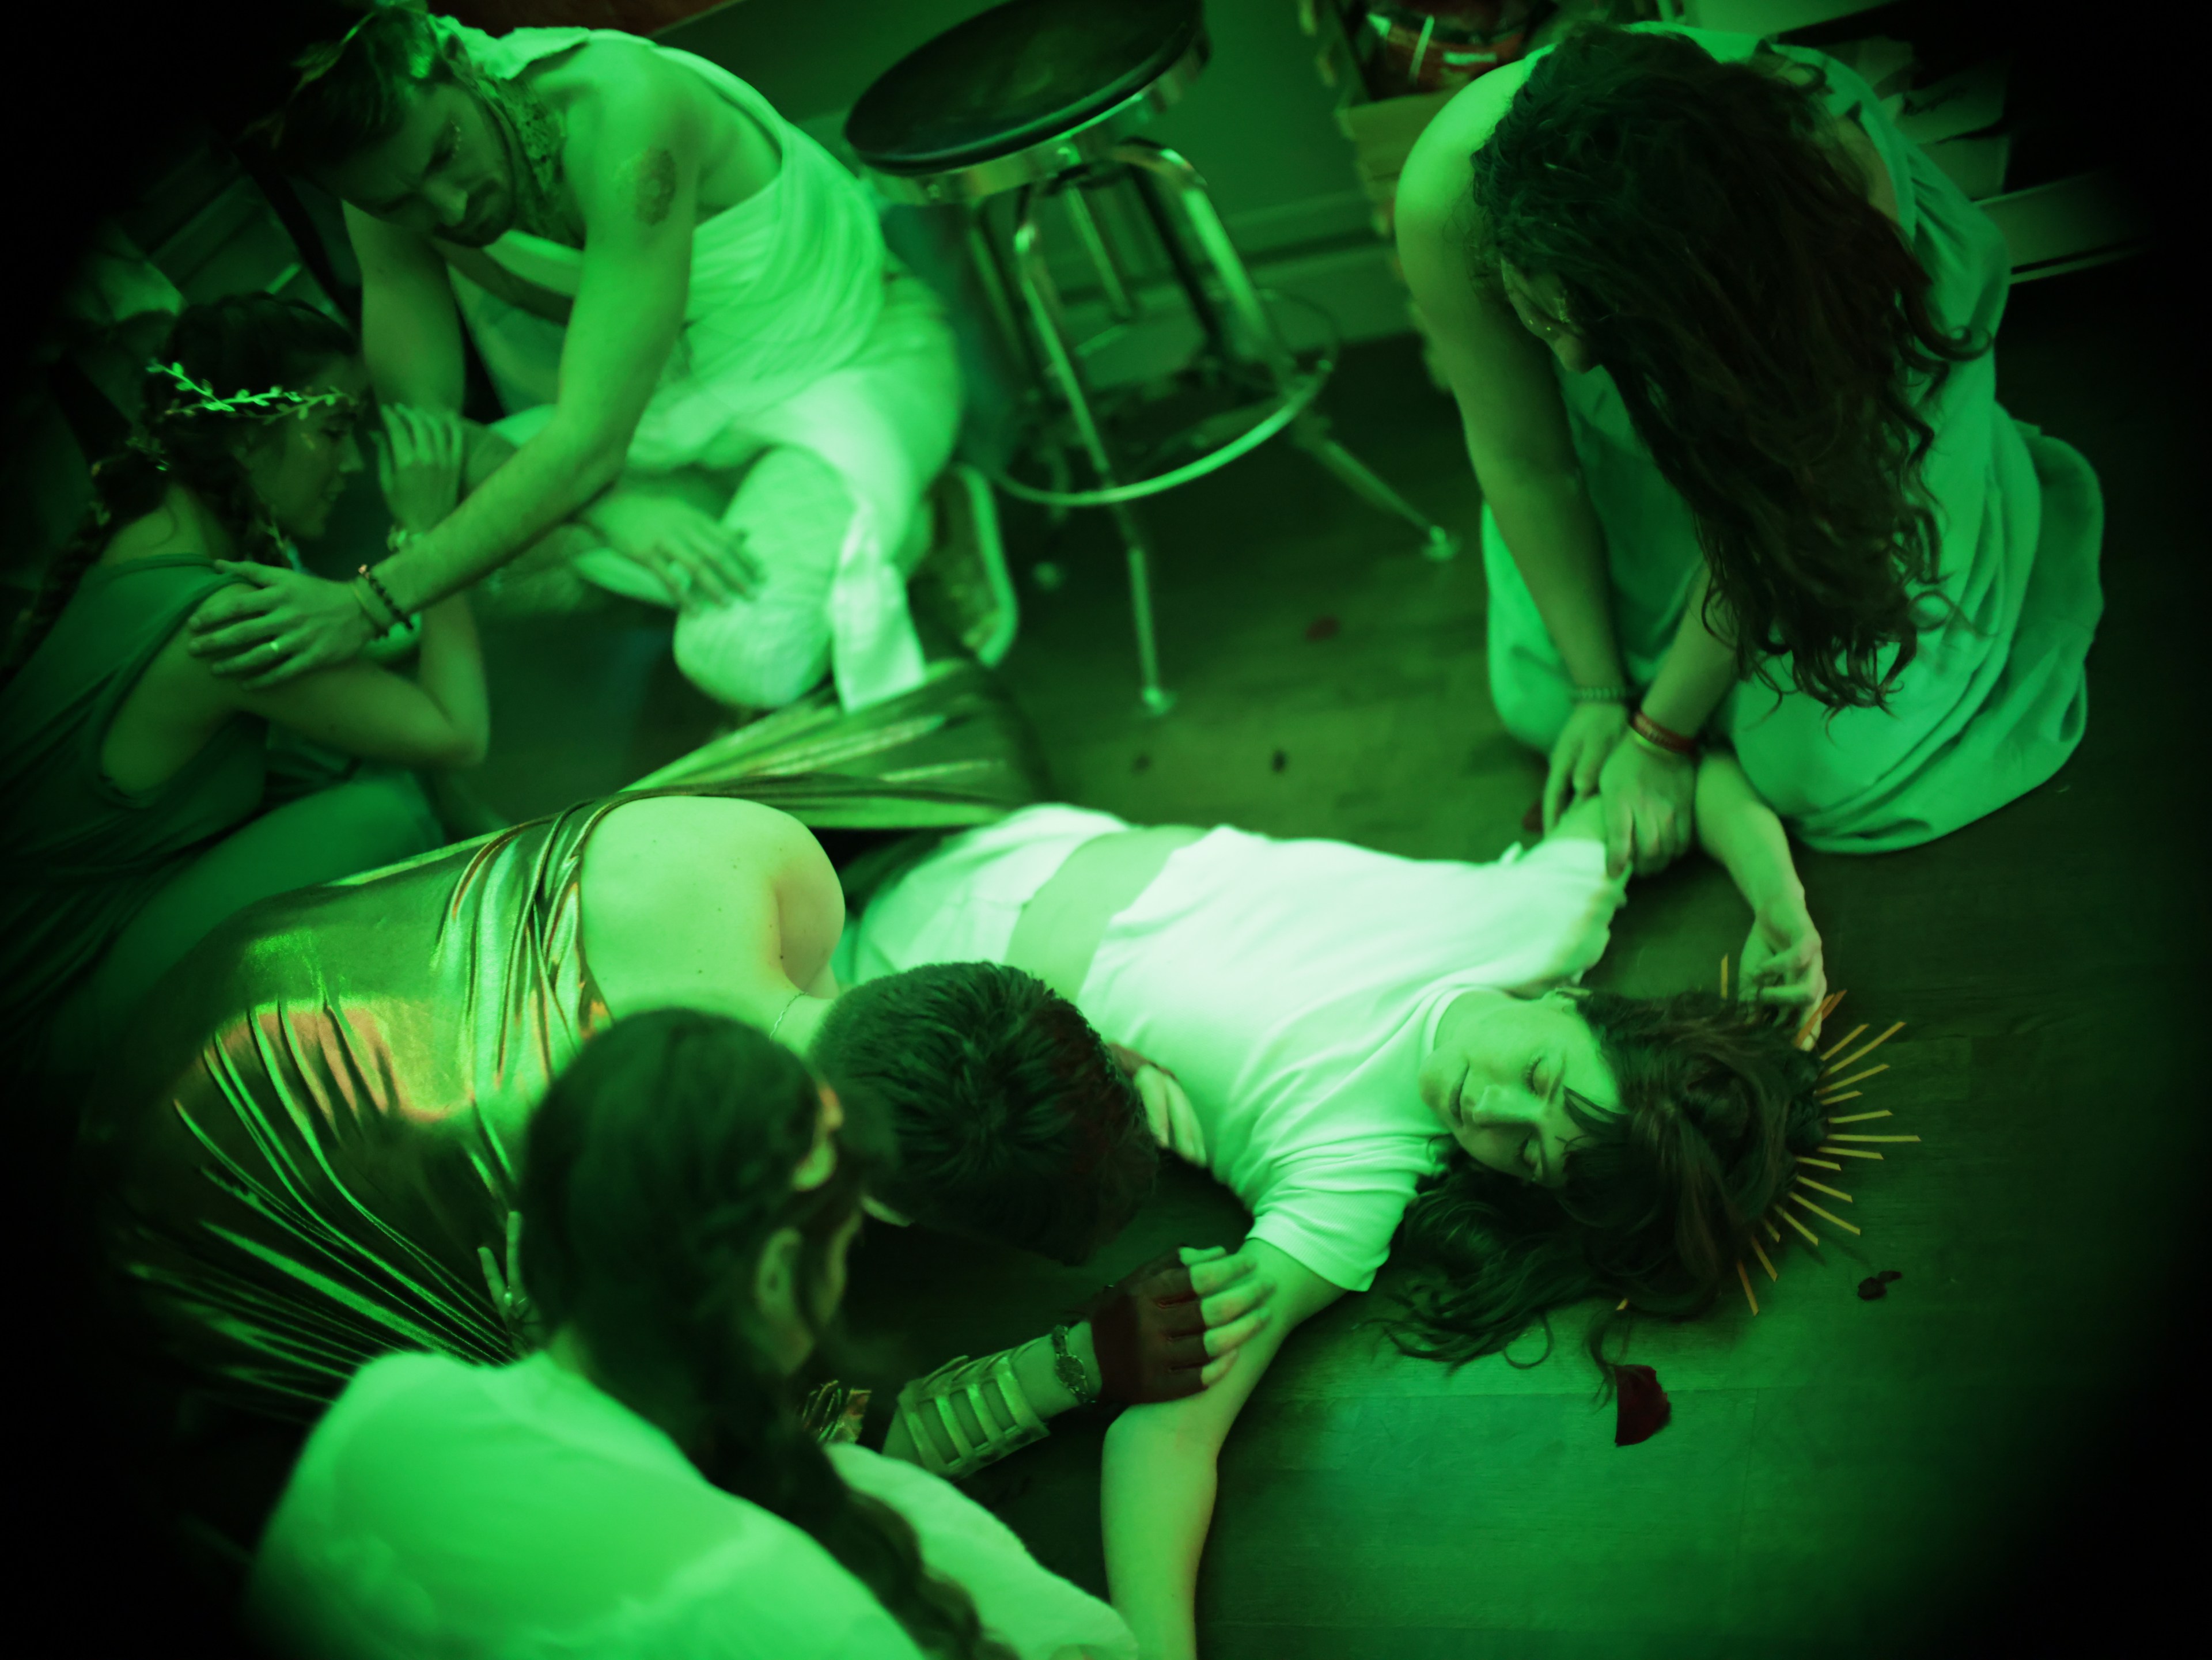 People in a green-lit room seem distraught, one lying on the floor as others attend to them.